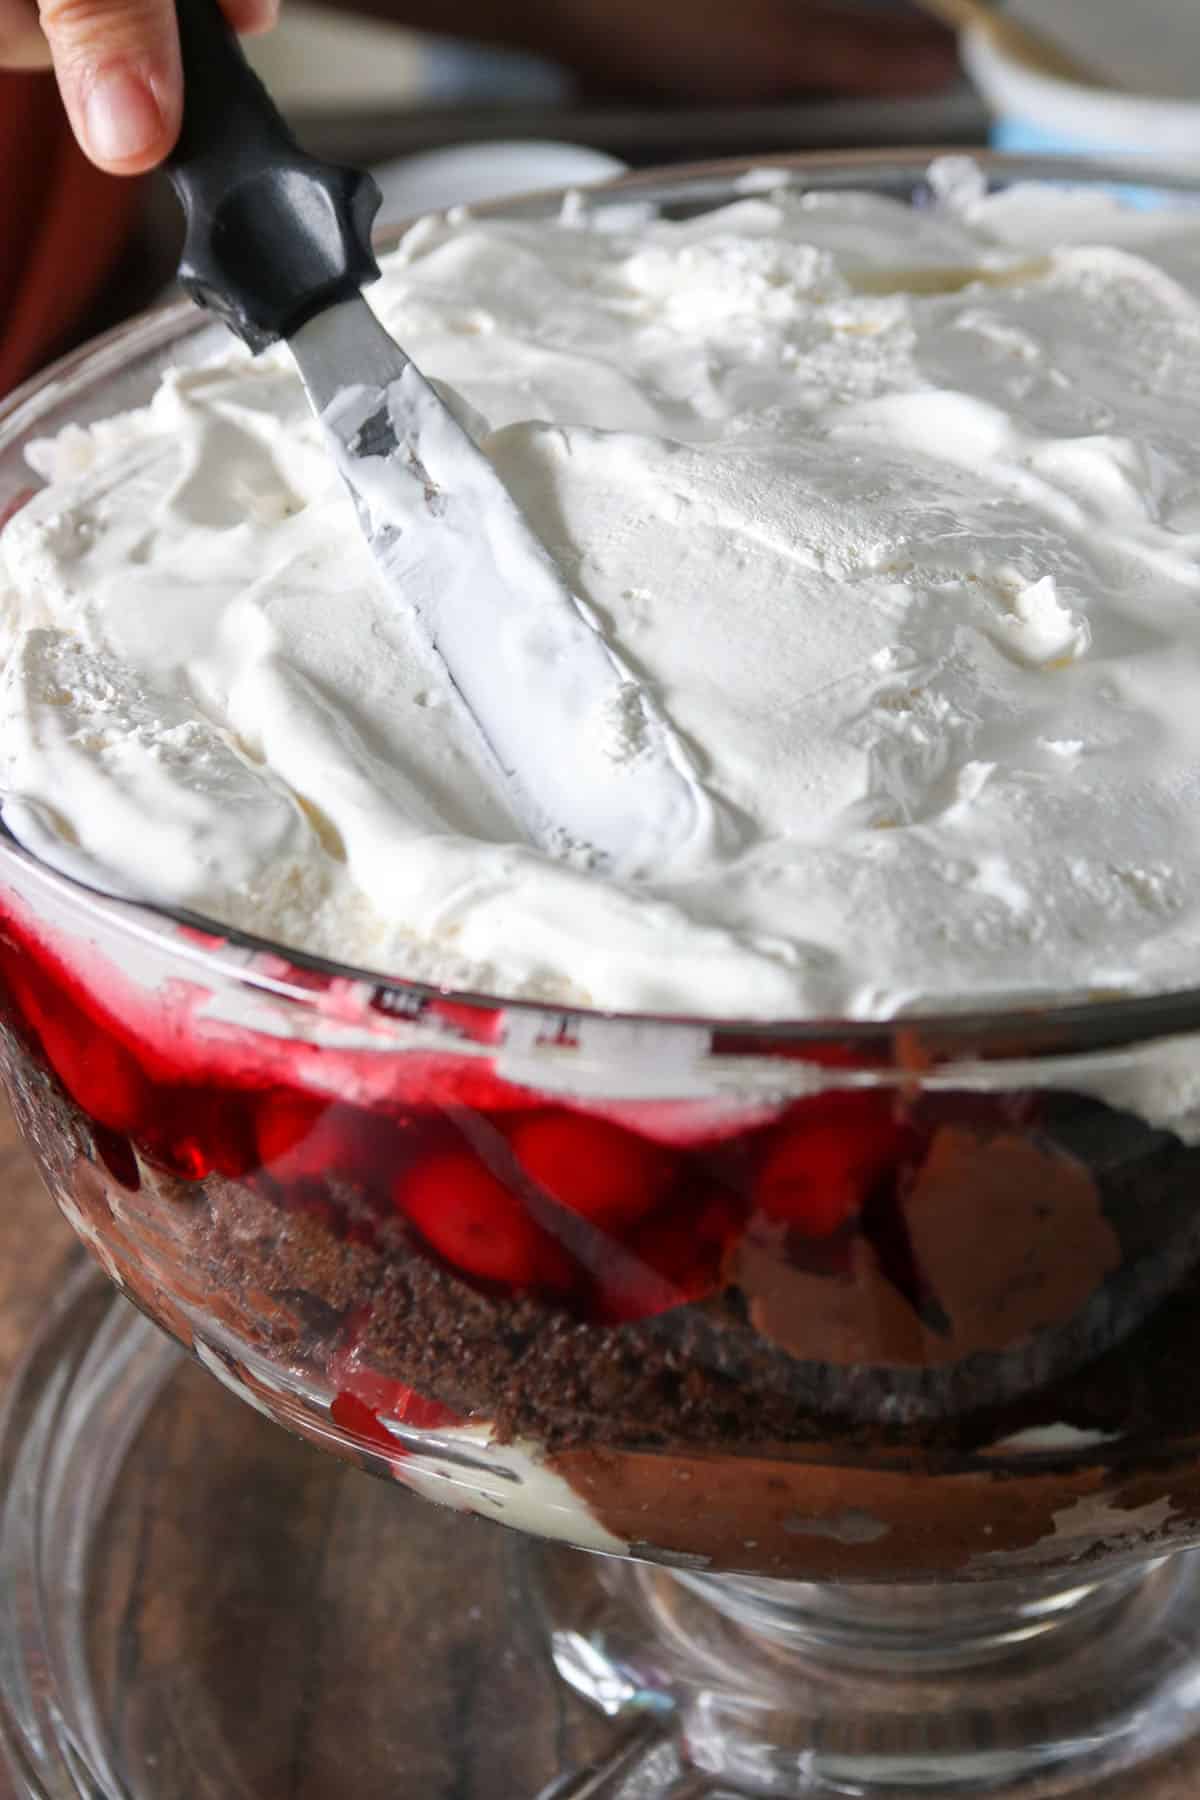 Spreading the cool whip topping on the trifle.